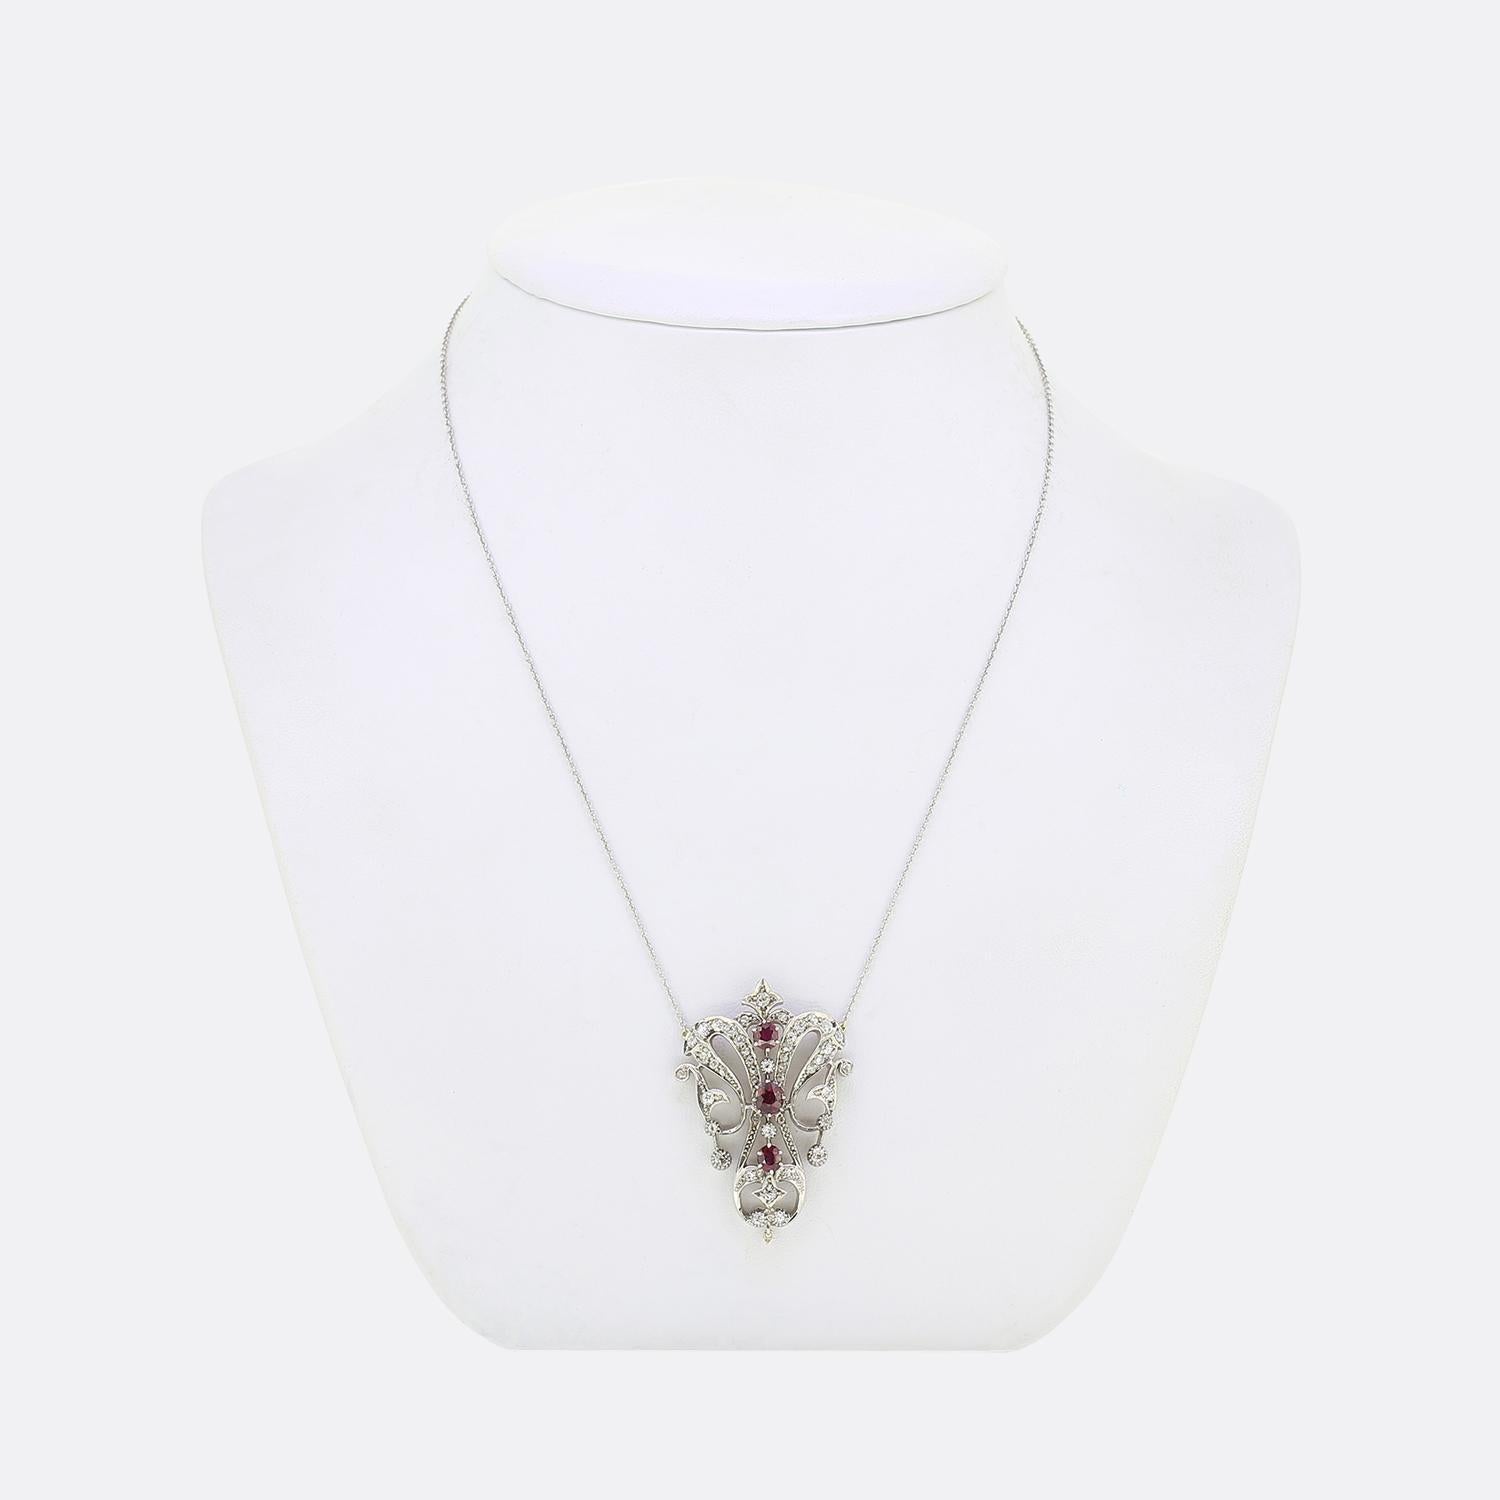 This is a wonderful Victorian era ruby and diamond drop necklace. The pendant's open frame consists of three central oval cut rubies which are surrounded by multiple round faceted natural diamonds of differing sizes. The necklace has been crafted in